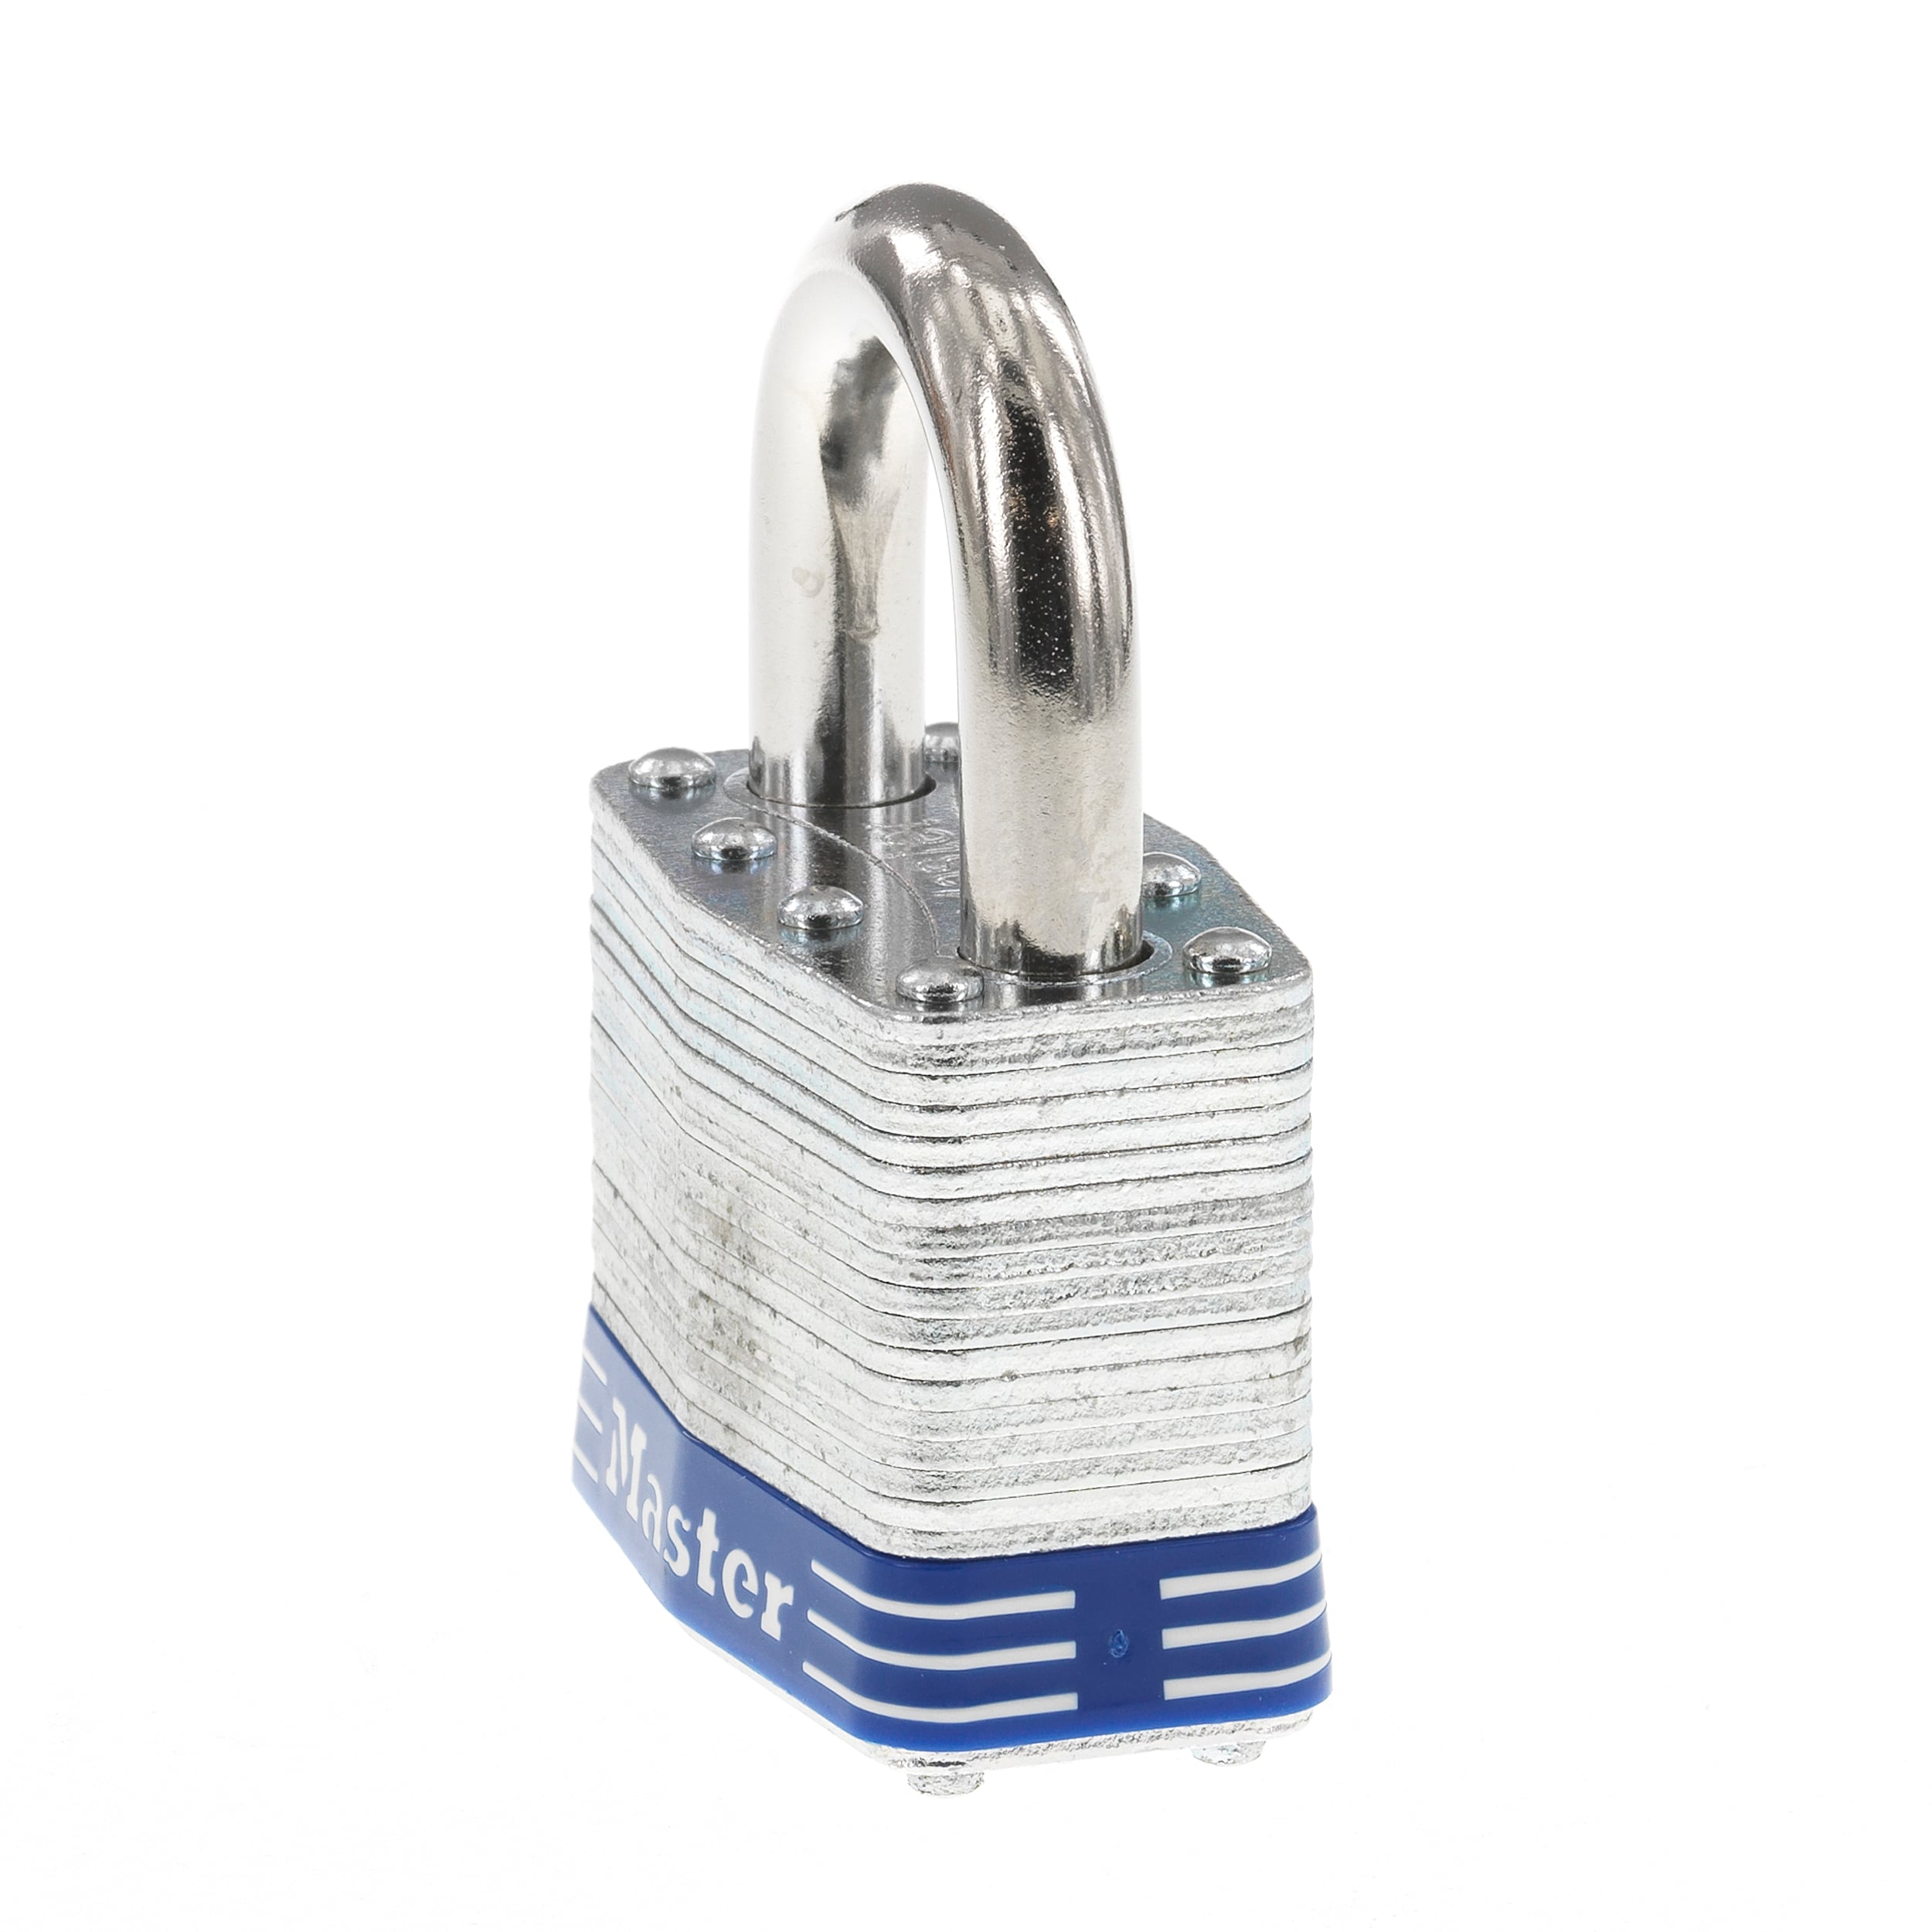 Details about   Federal FD732 Sold Secure Silver CEN  4 Super Heavy Duty Solid Steel Padlocks 